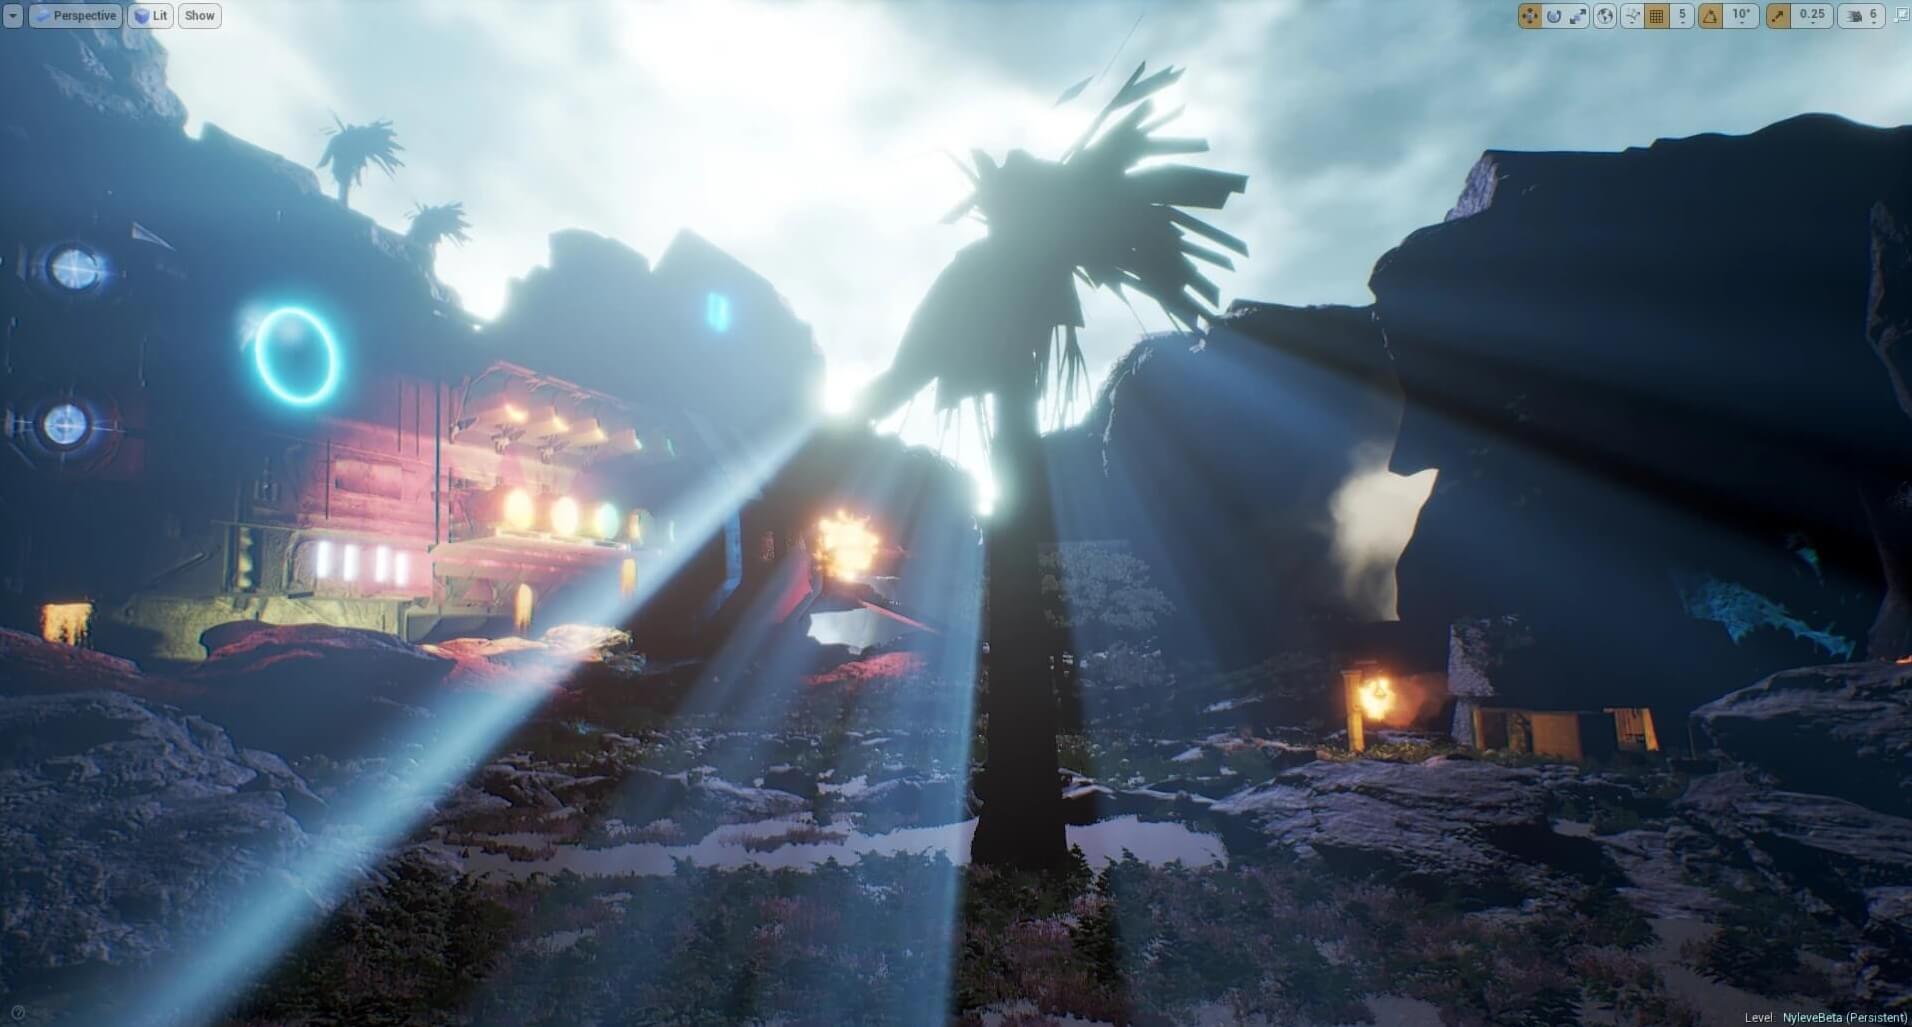 Someone is remaking the original Unreal with Unreal Engine 4 and ray tracing effects